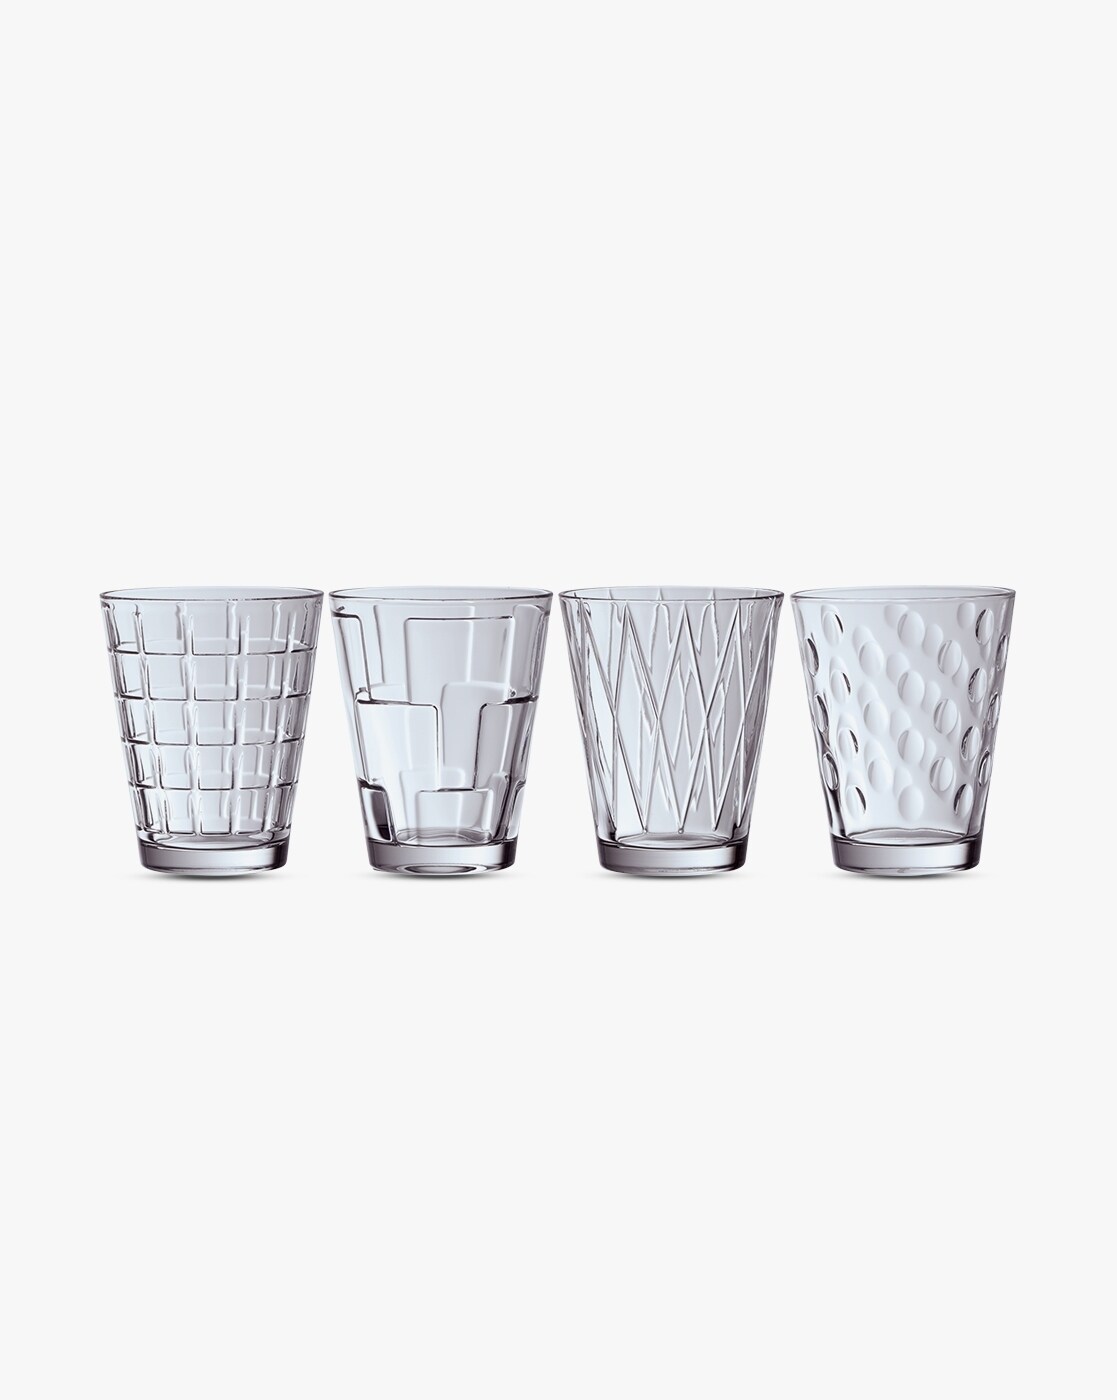 Buy VILLEROY & BOCH Set of 4 Dressed Up Water Glasses - 310 ml, Opaque  White Color Home & Kitchen